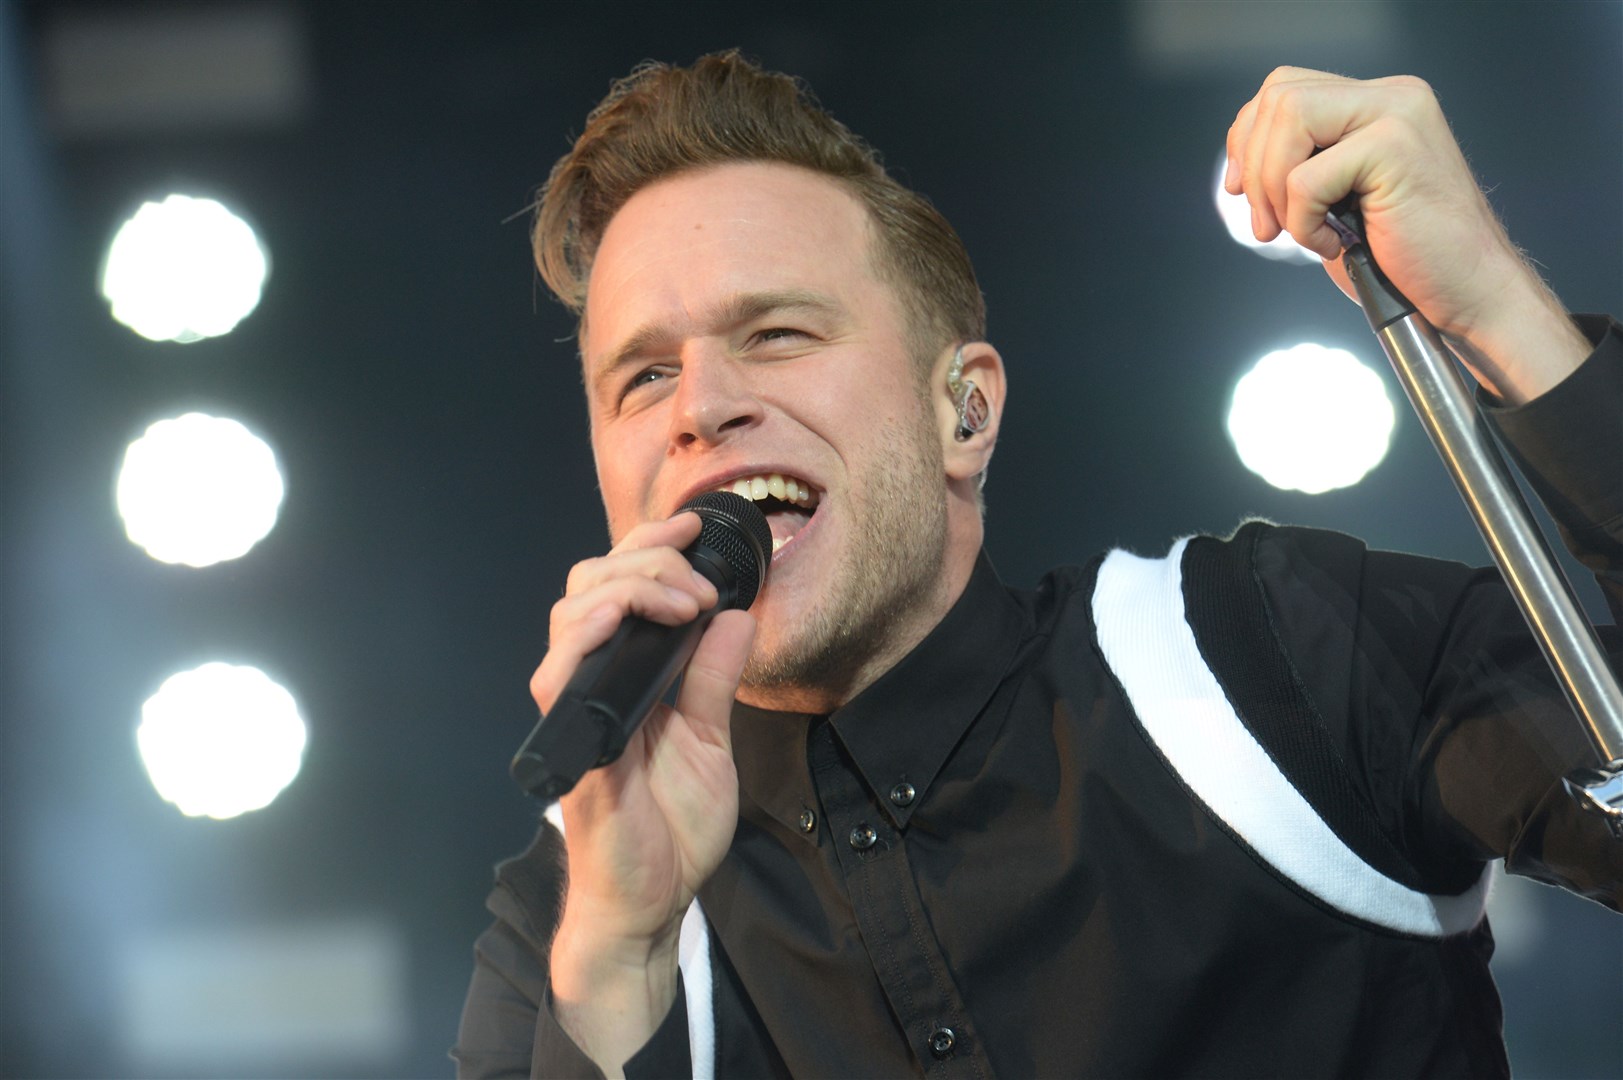 Olly Murs performing at Bught Park in 2017.